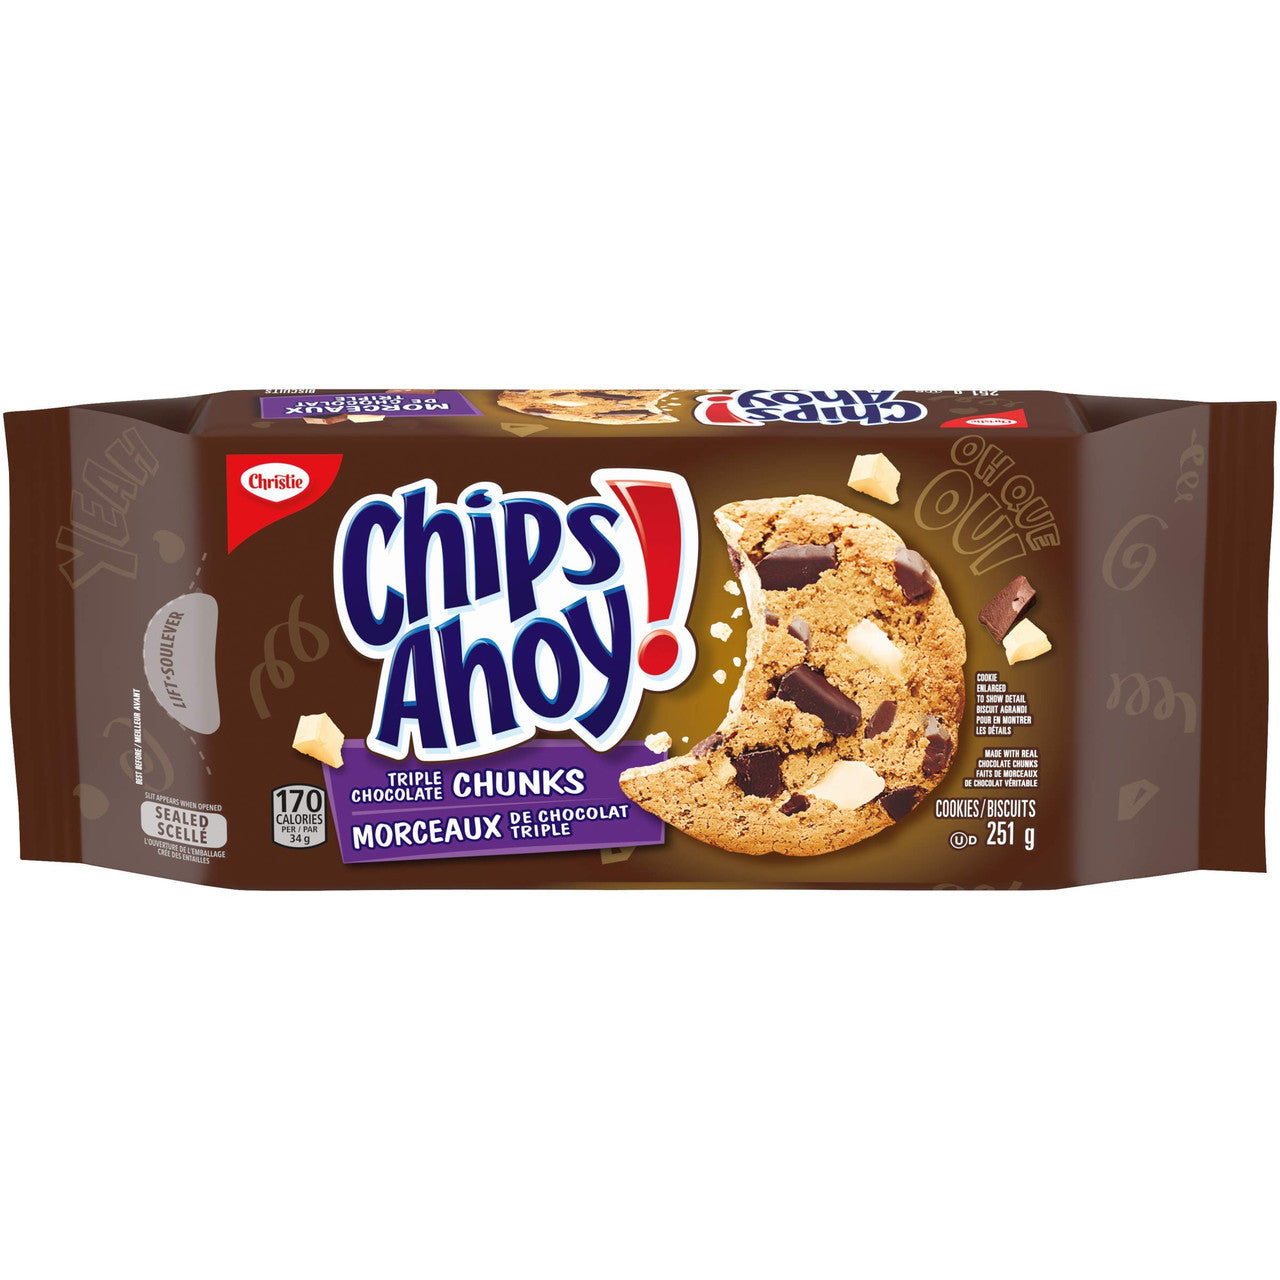 Christie Chips Ahoy Triple Chocolate Chunks Chocolate Chip Cookies, 251g/8.9oz {Imported from Canada}